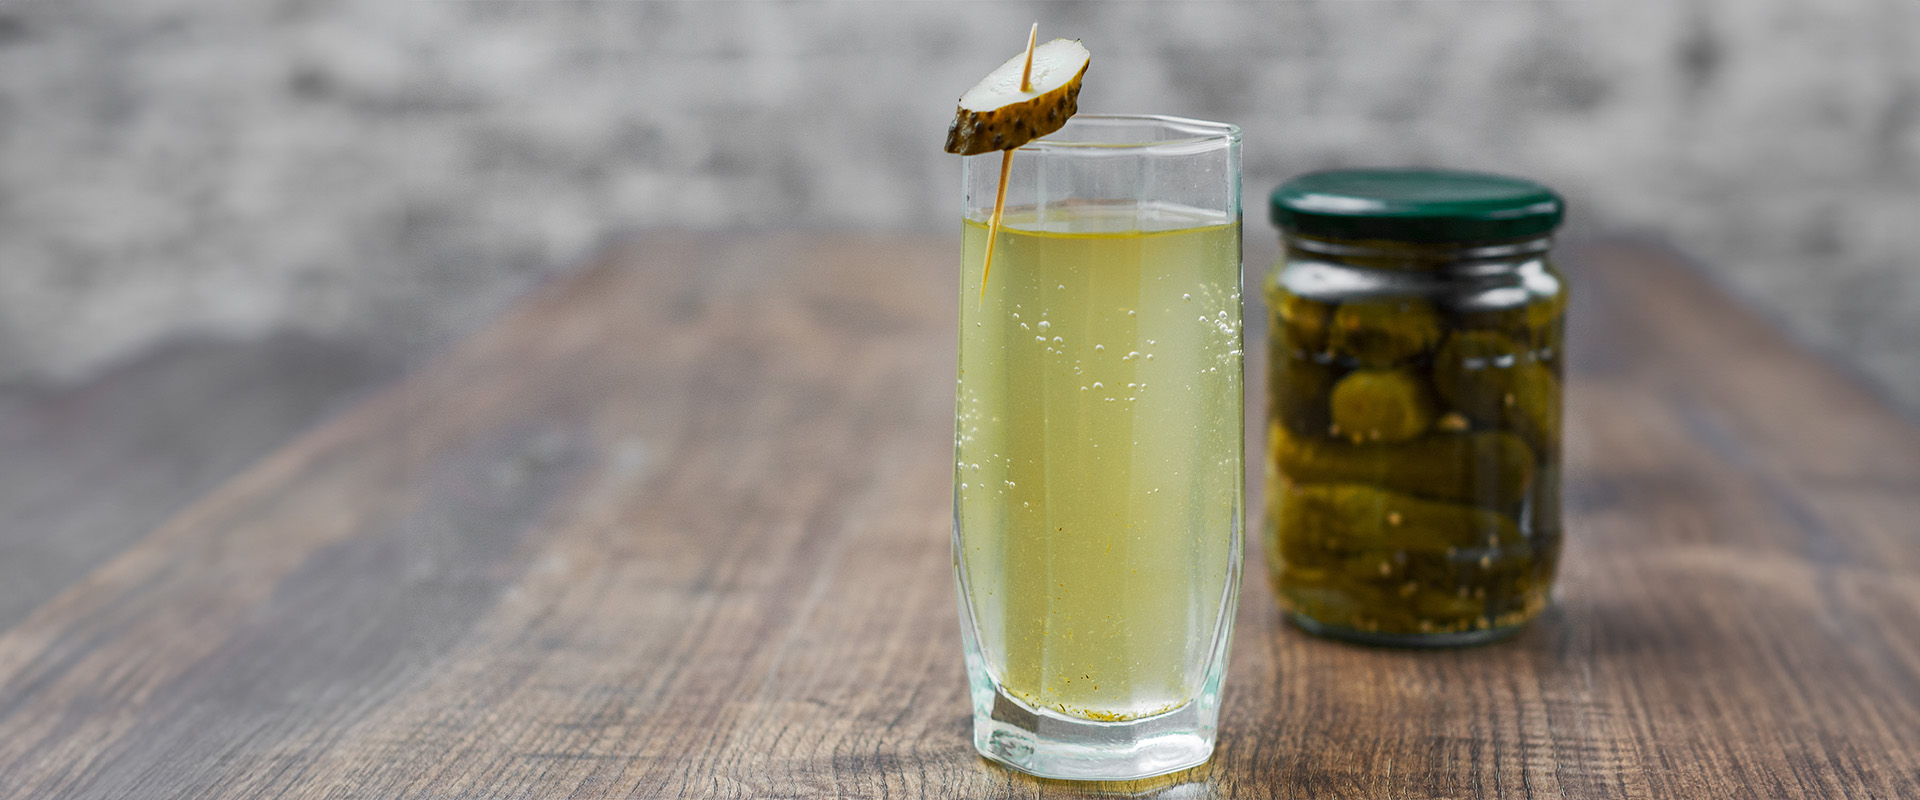 Benefits of Pickle Juice You Didn’t Know